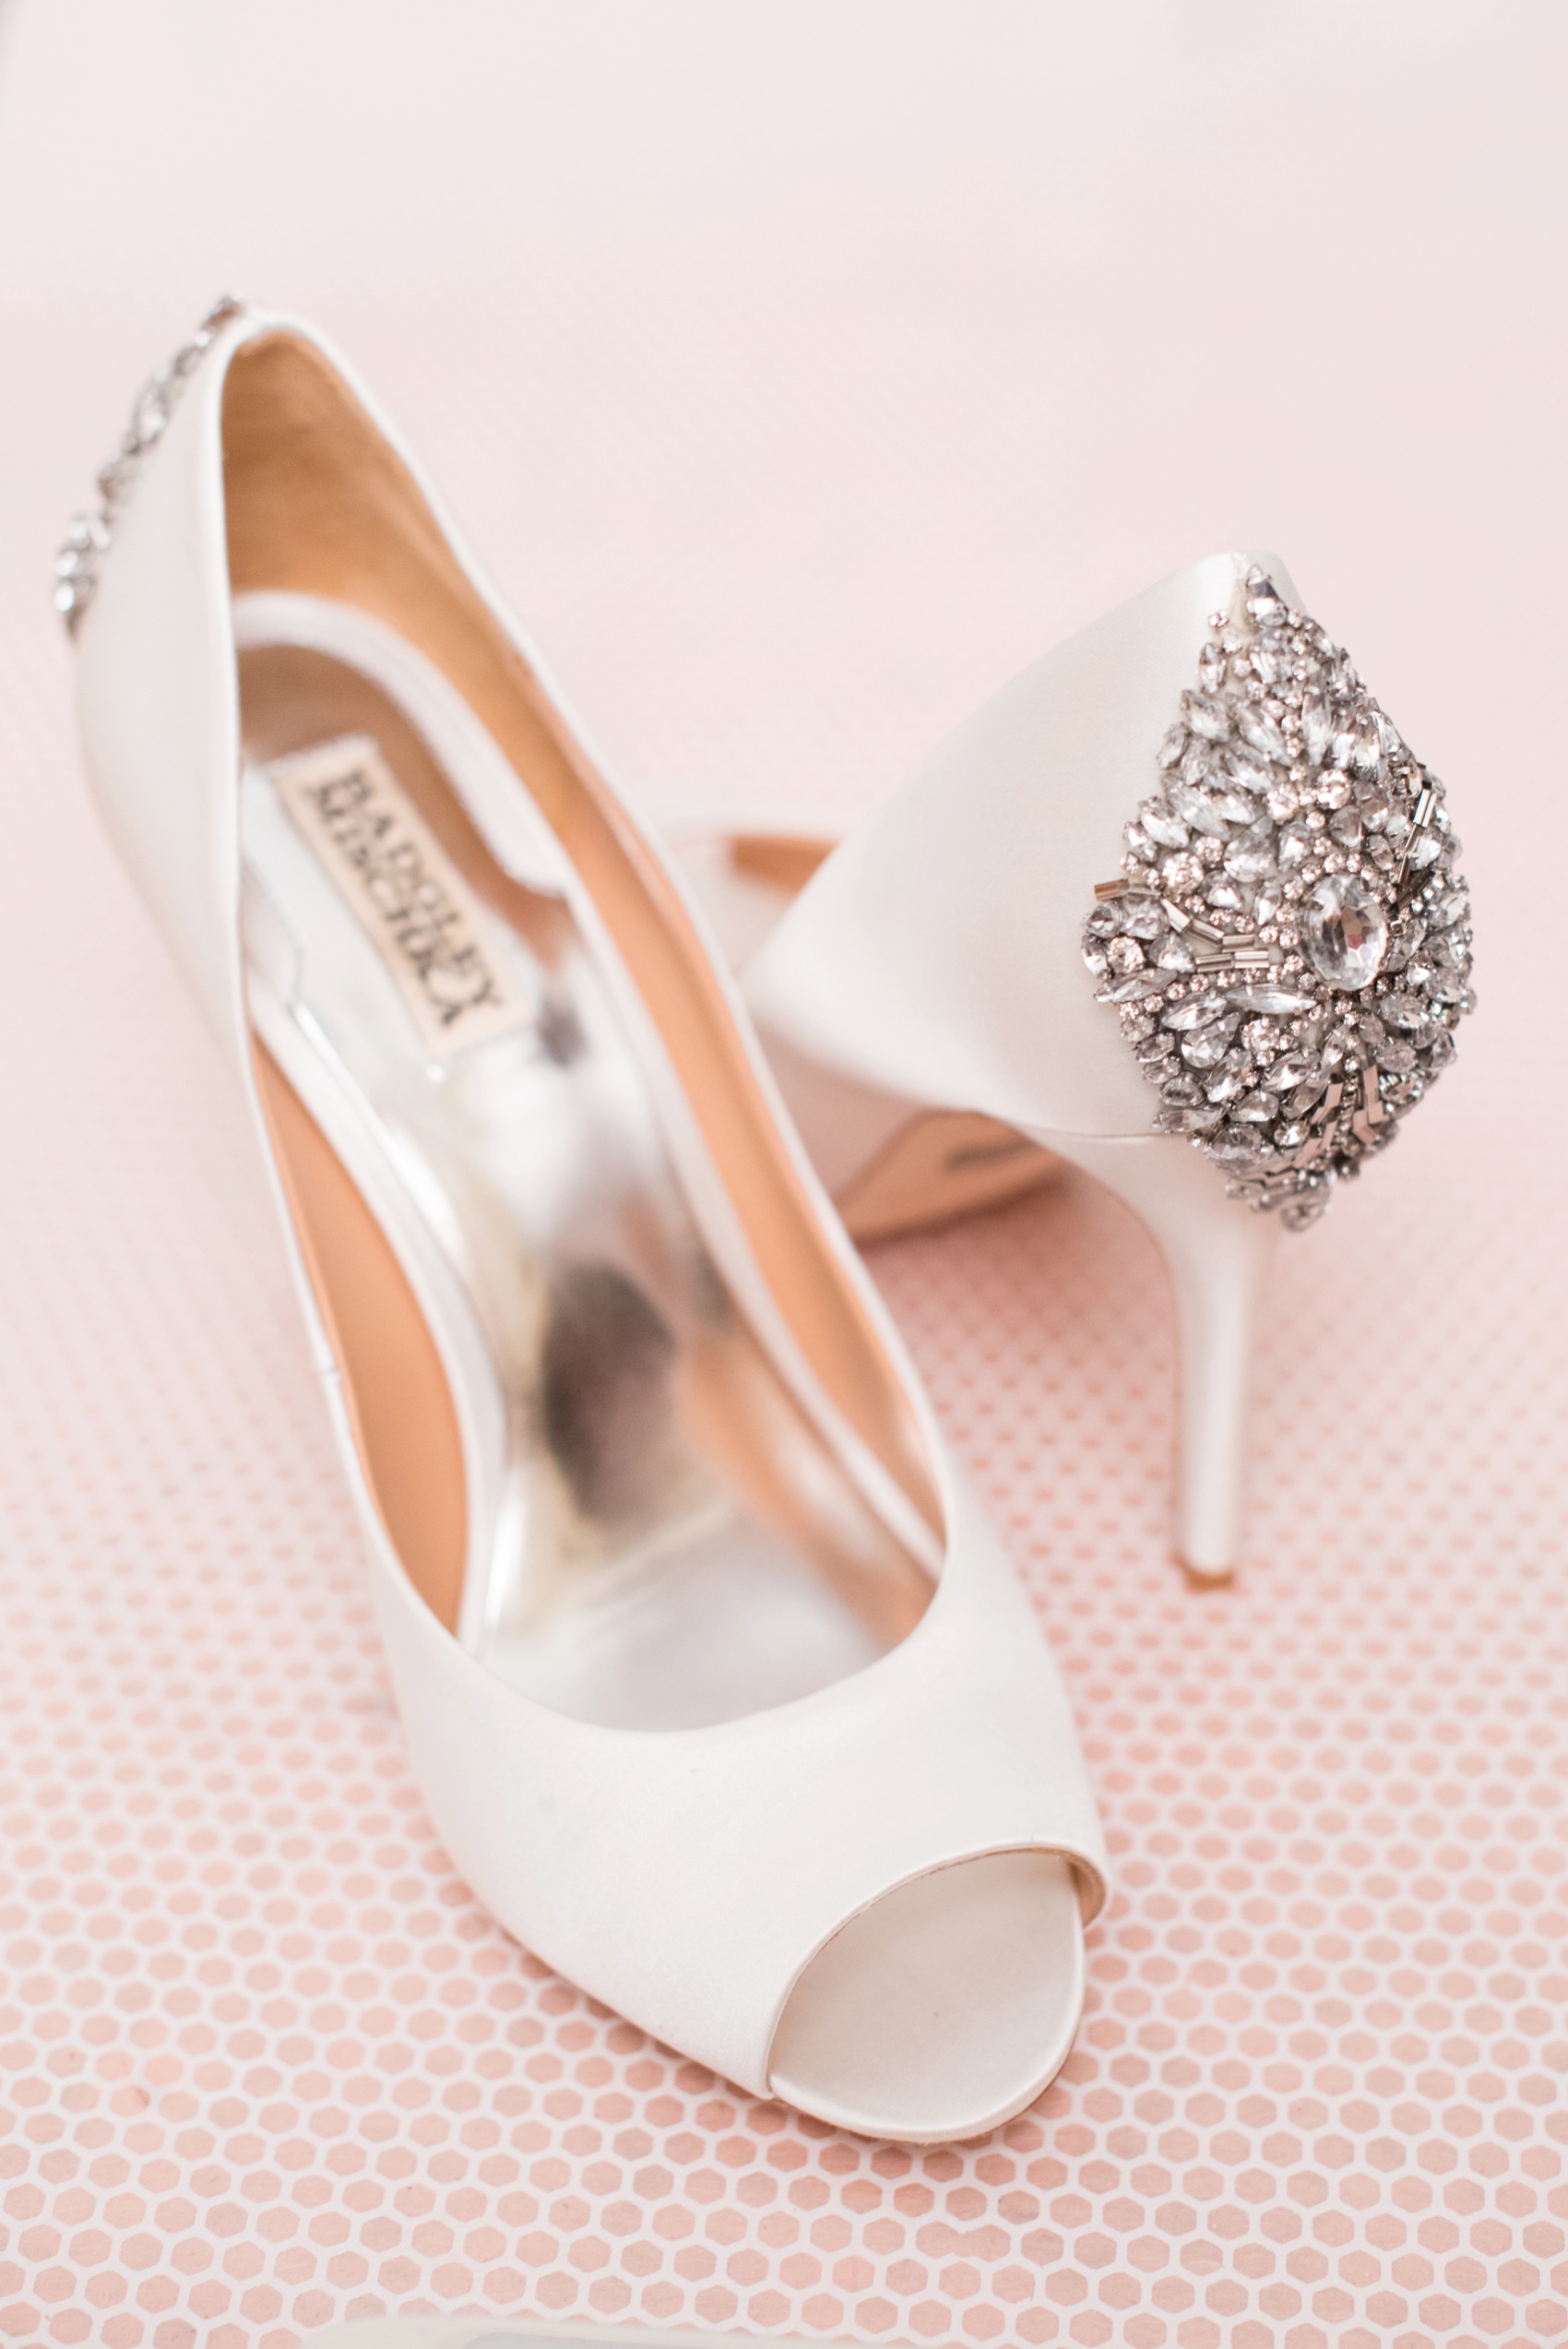 Colorful wedding photos by Mikkel Paige Photography, NYC wedding photographer. Planning by Dulce Dreams Events. Badgley Mischka white rhinestone heels.